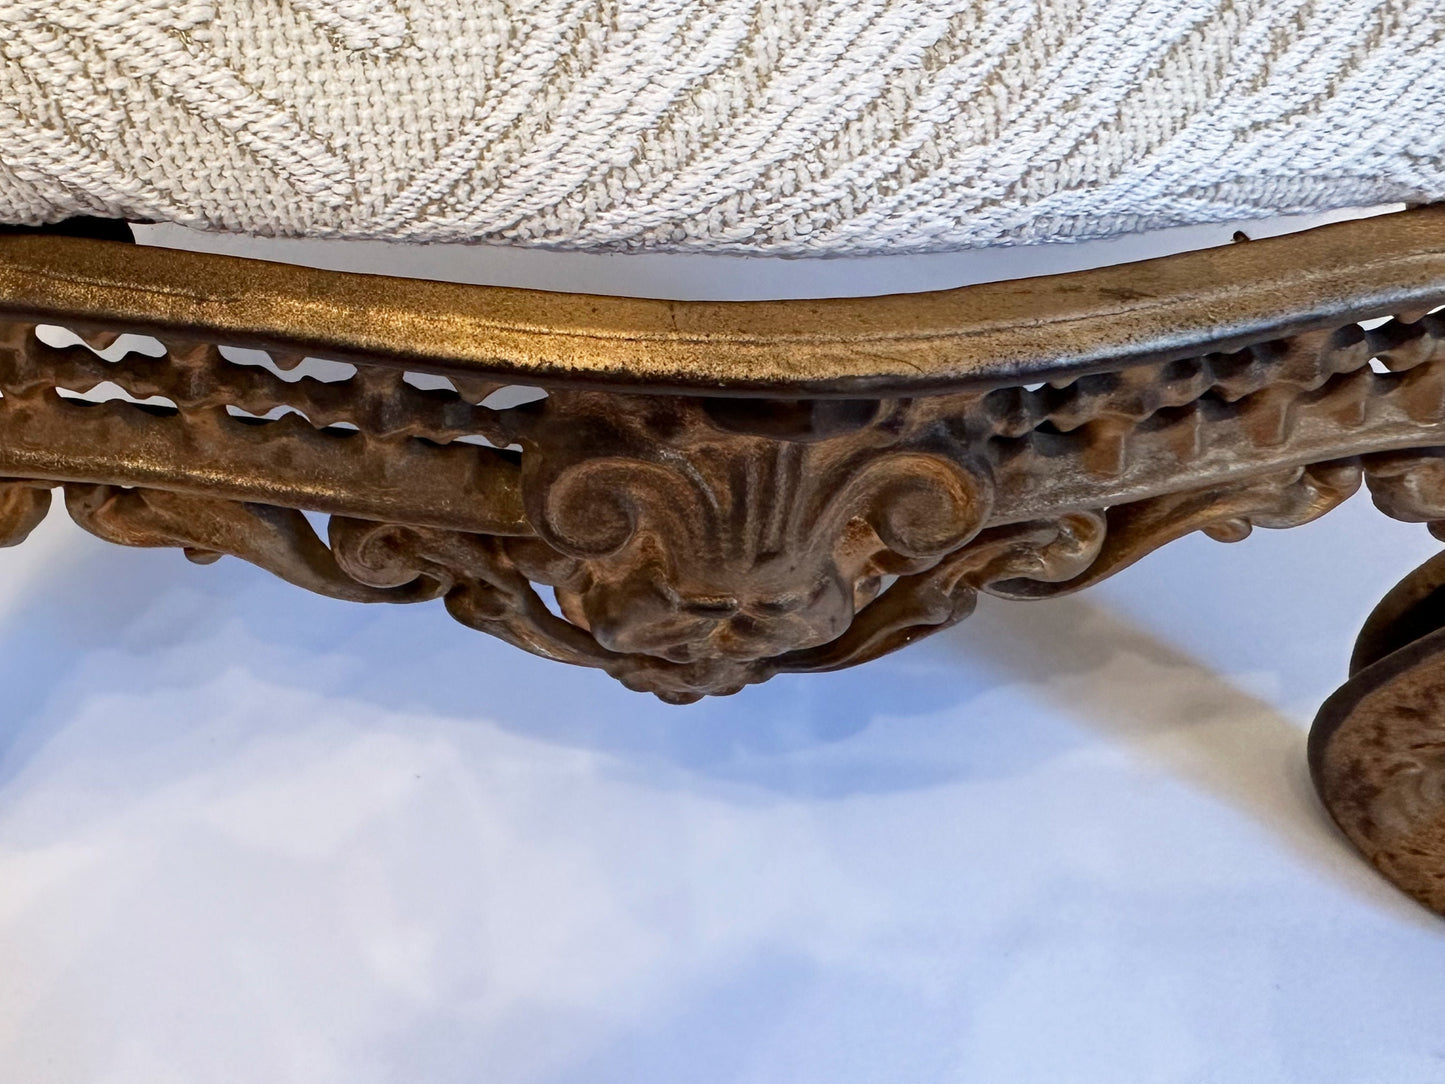 Vintage Footstool Cast Iron Foot Stool Ornate Victorian Louis XV Style Metal Ottoman Victorian Decor Botanical Upholstered Footrest